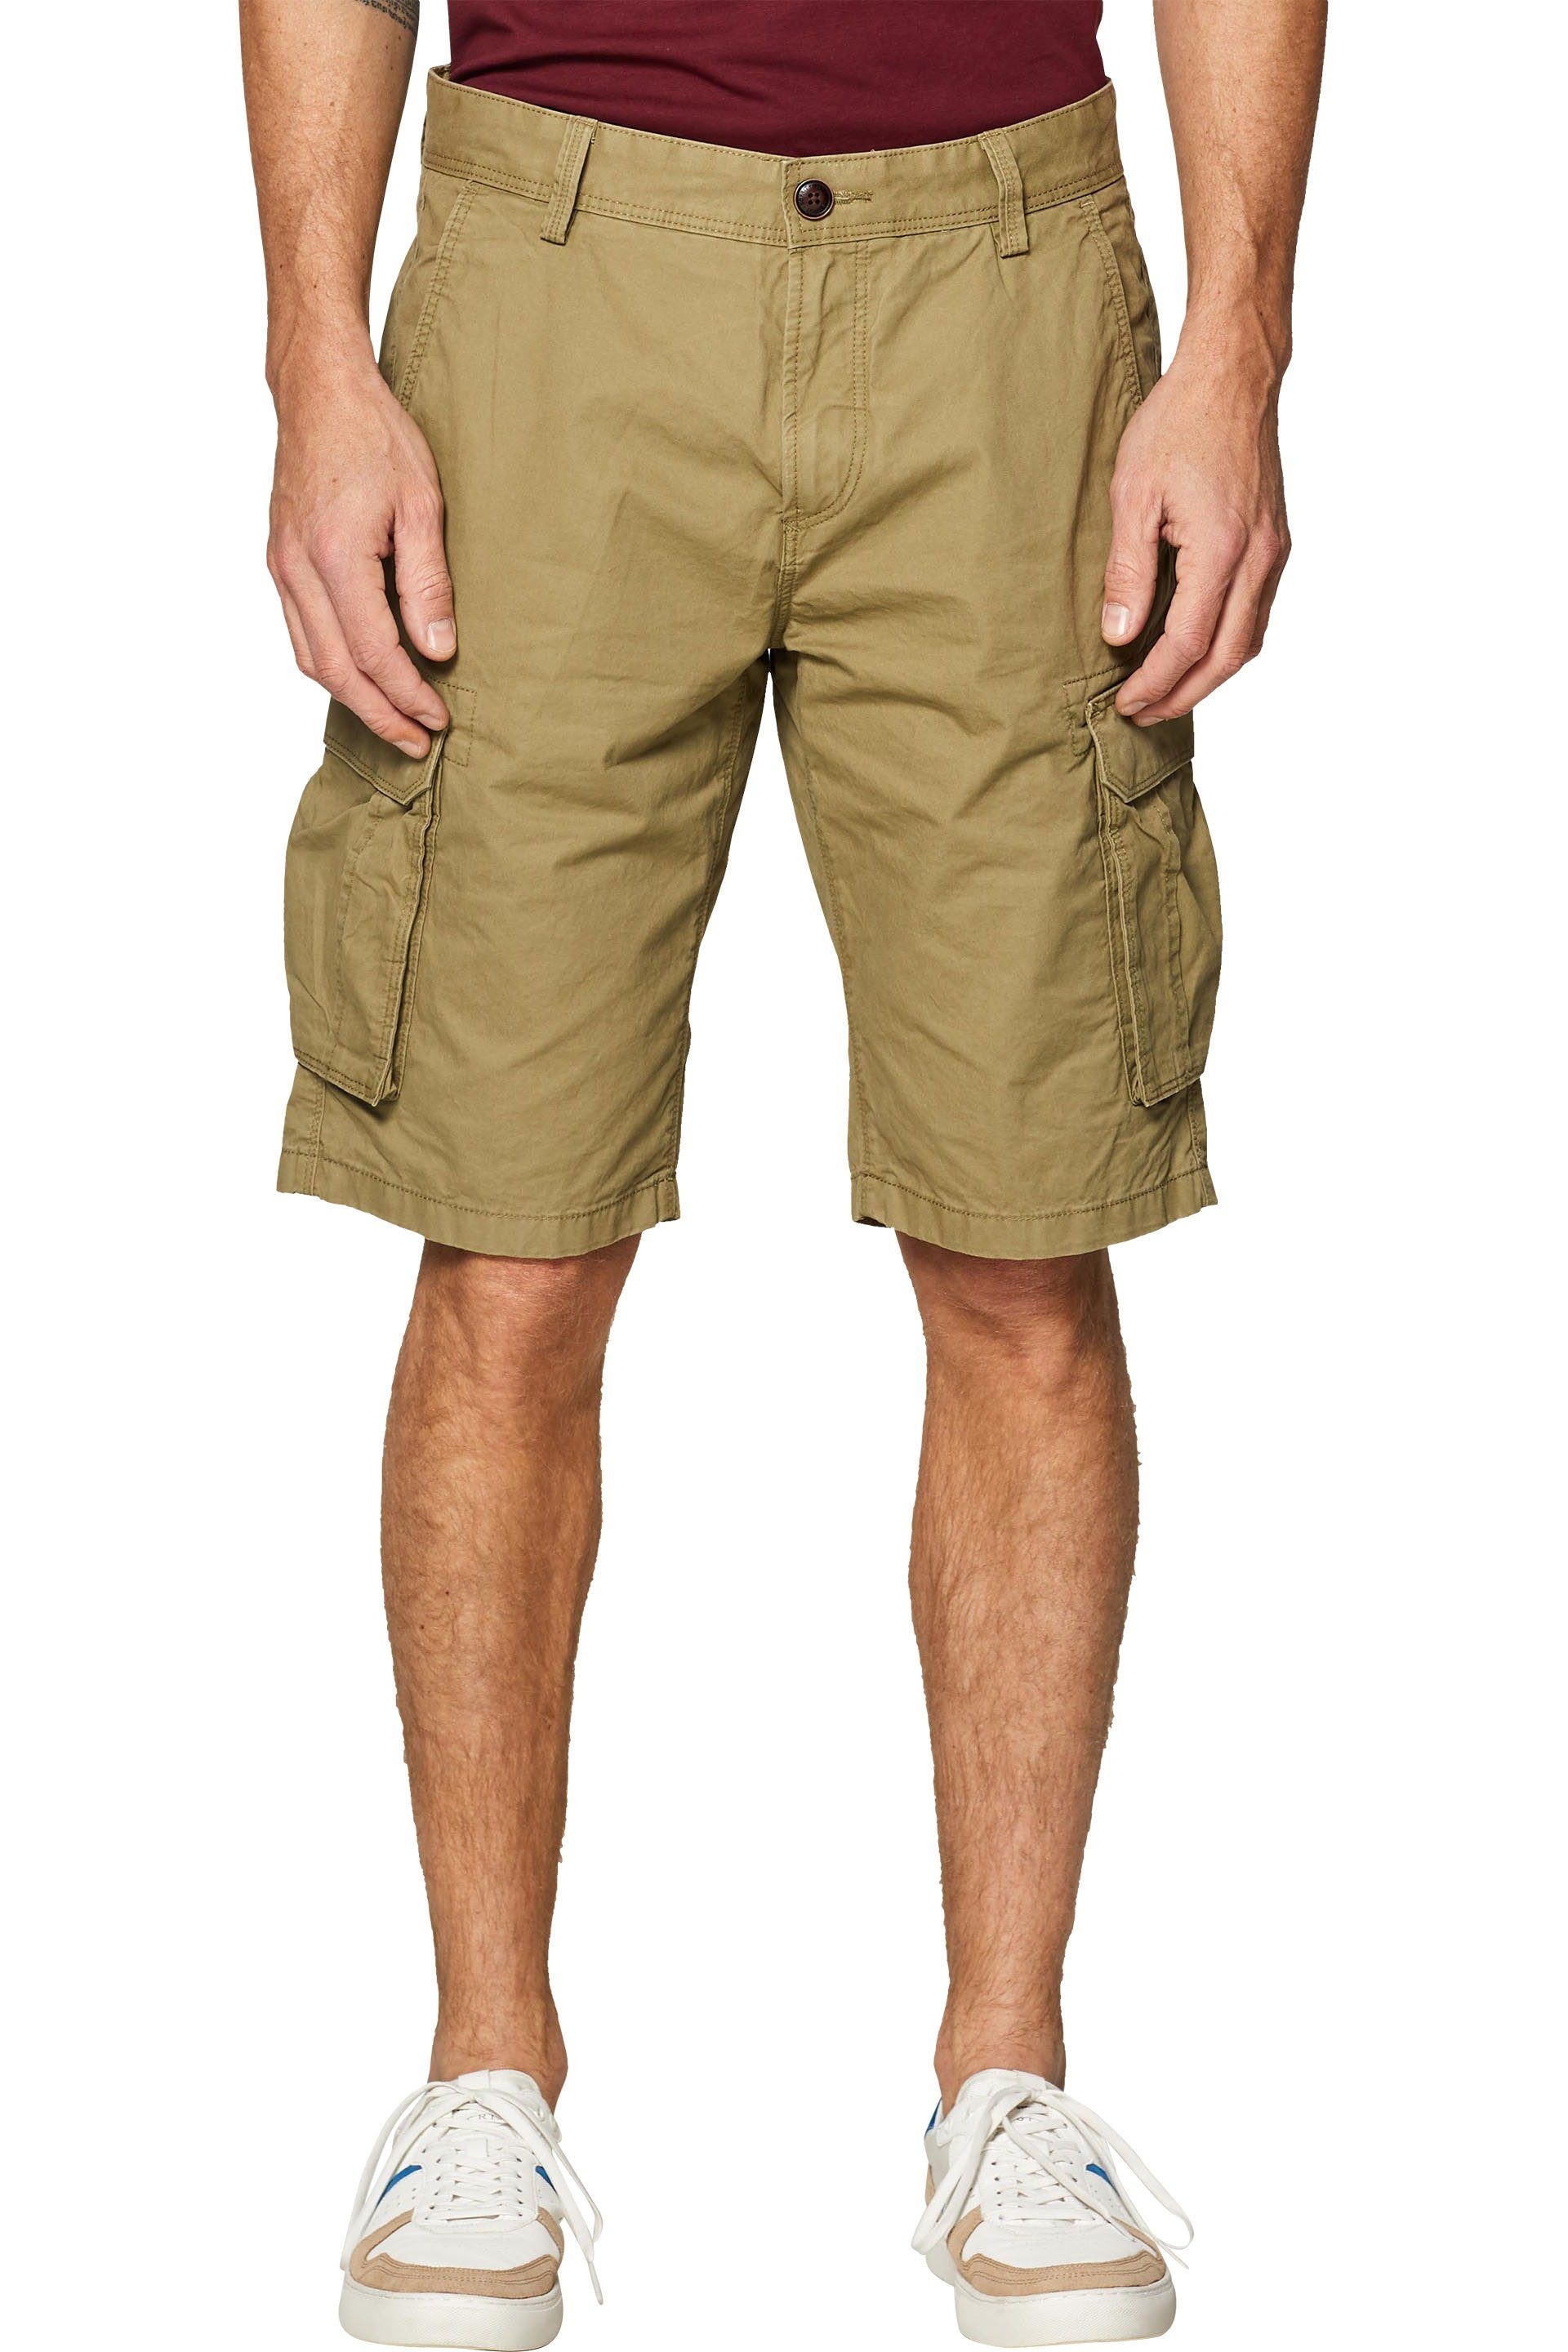 Esprit OLIVE Shorts Collection